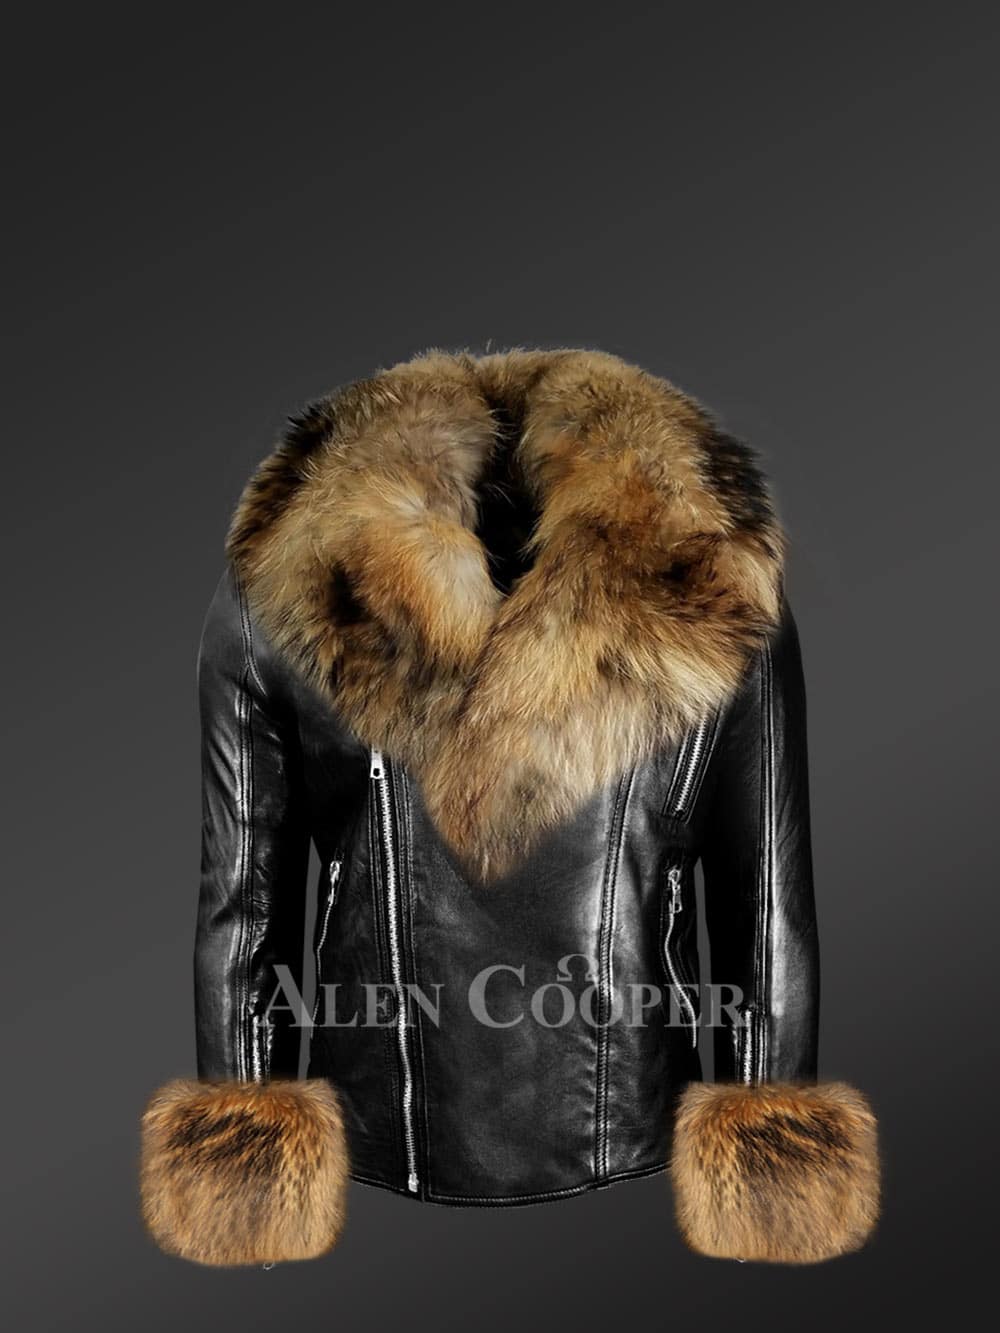 Men’s Chic leather jackets with genuine fur collar and handcuffs